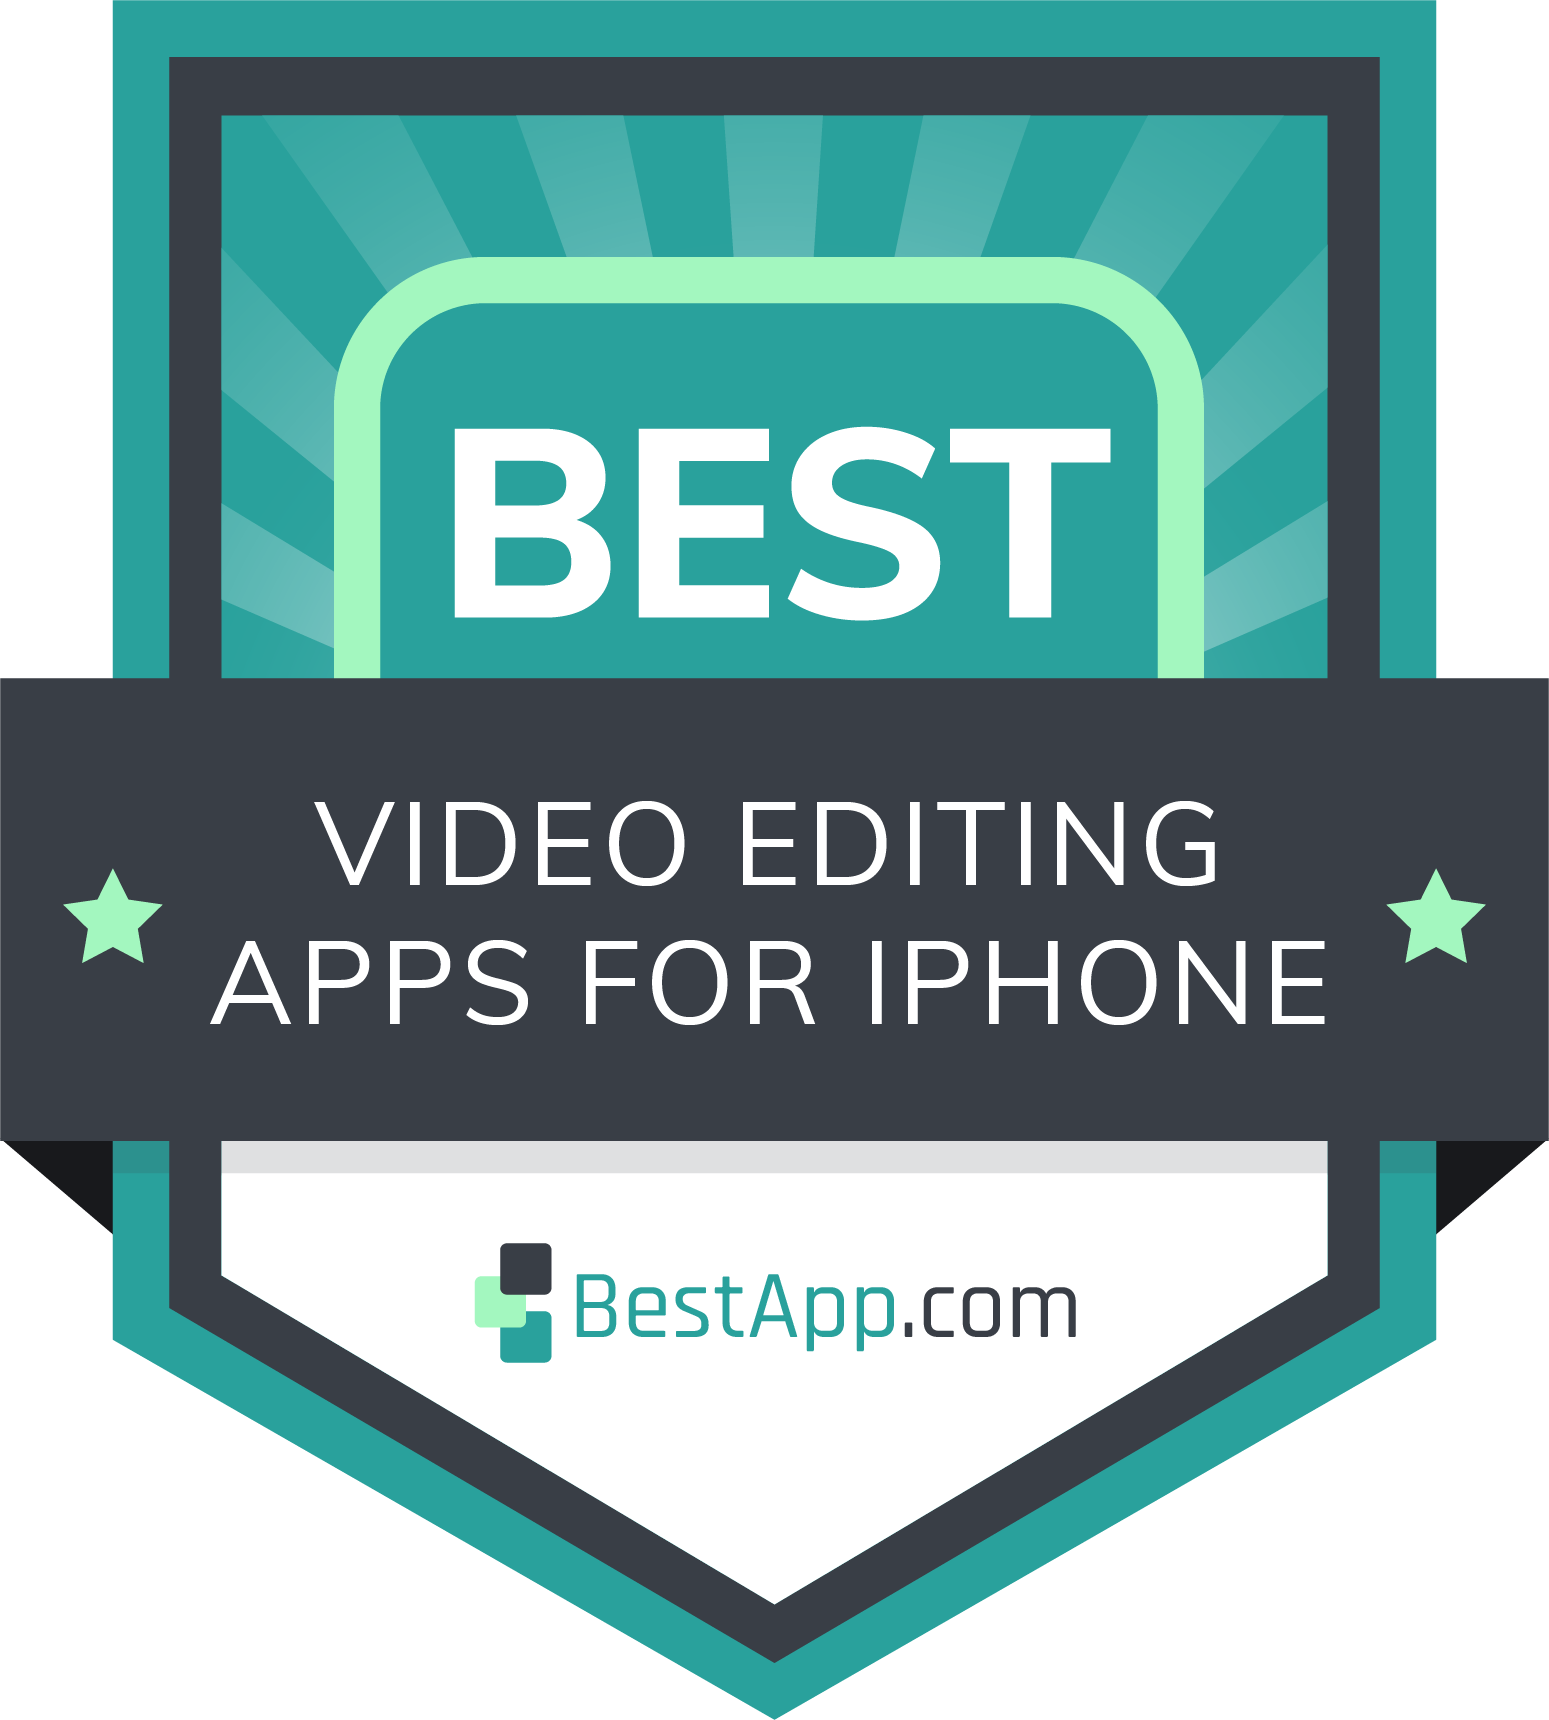 Best Video Editing Apps for iPhones Badge